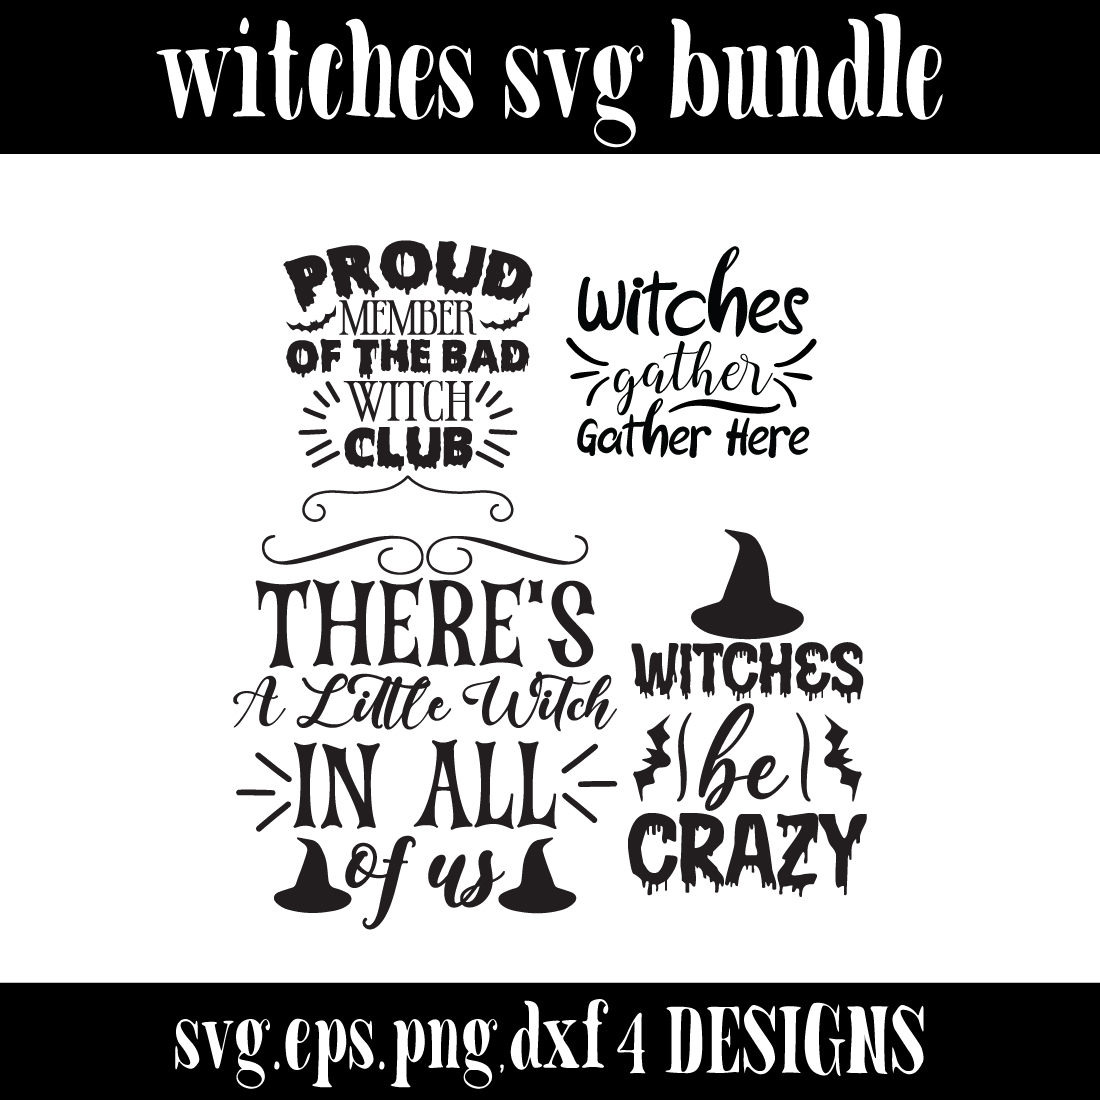 witches svg bundle preview image.